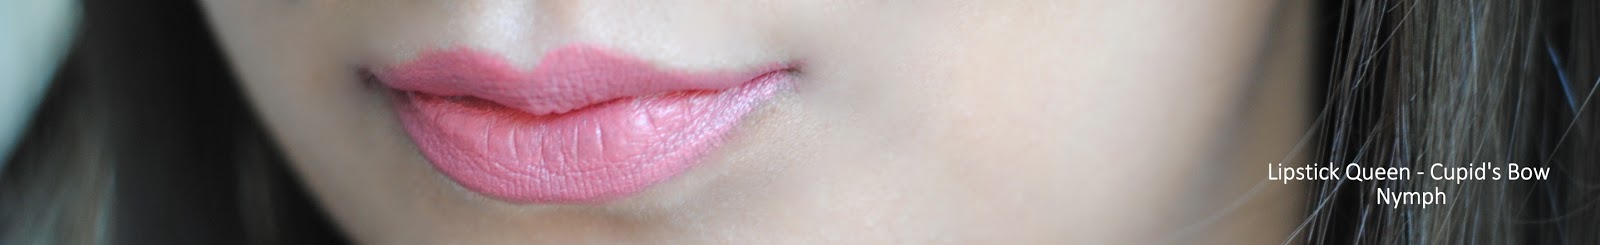 lipstick queen cupid's bow swatches nymph